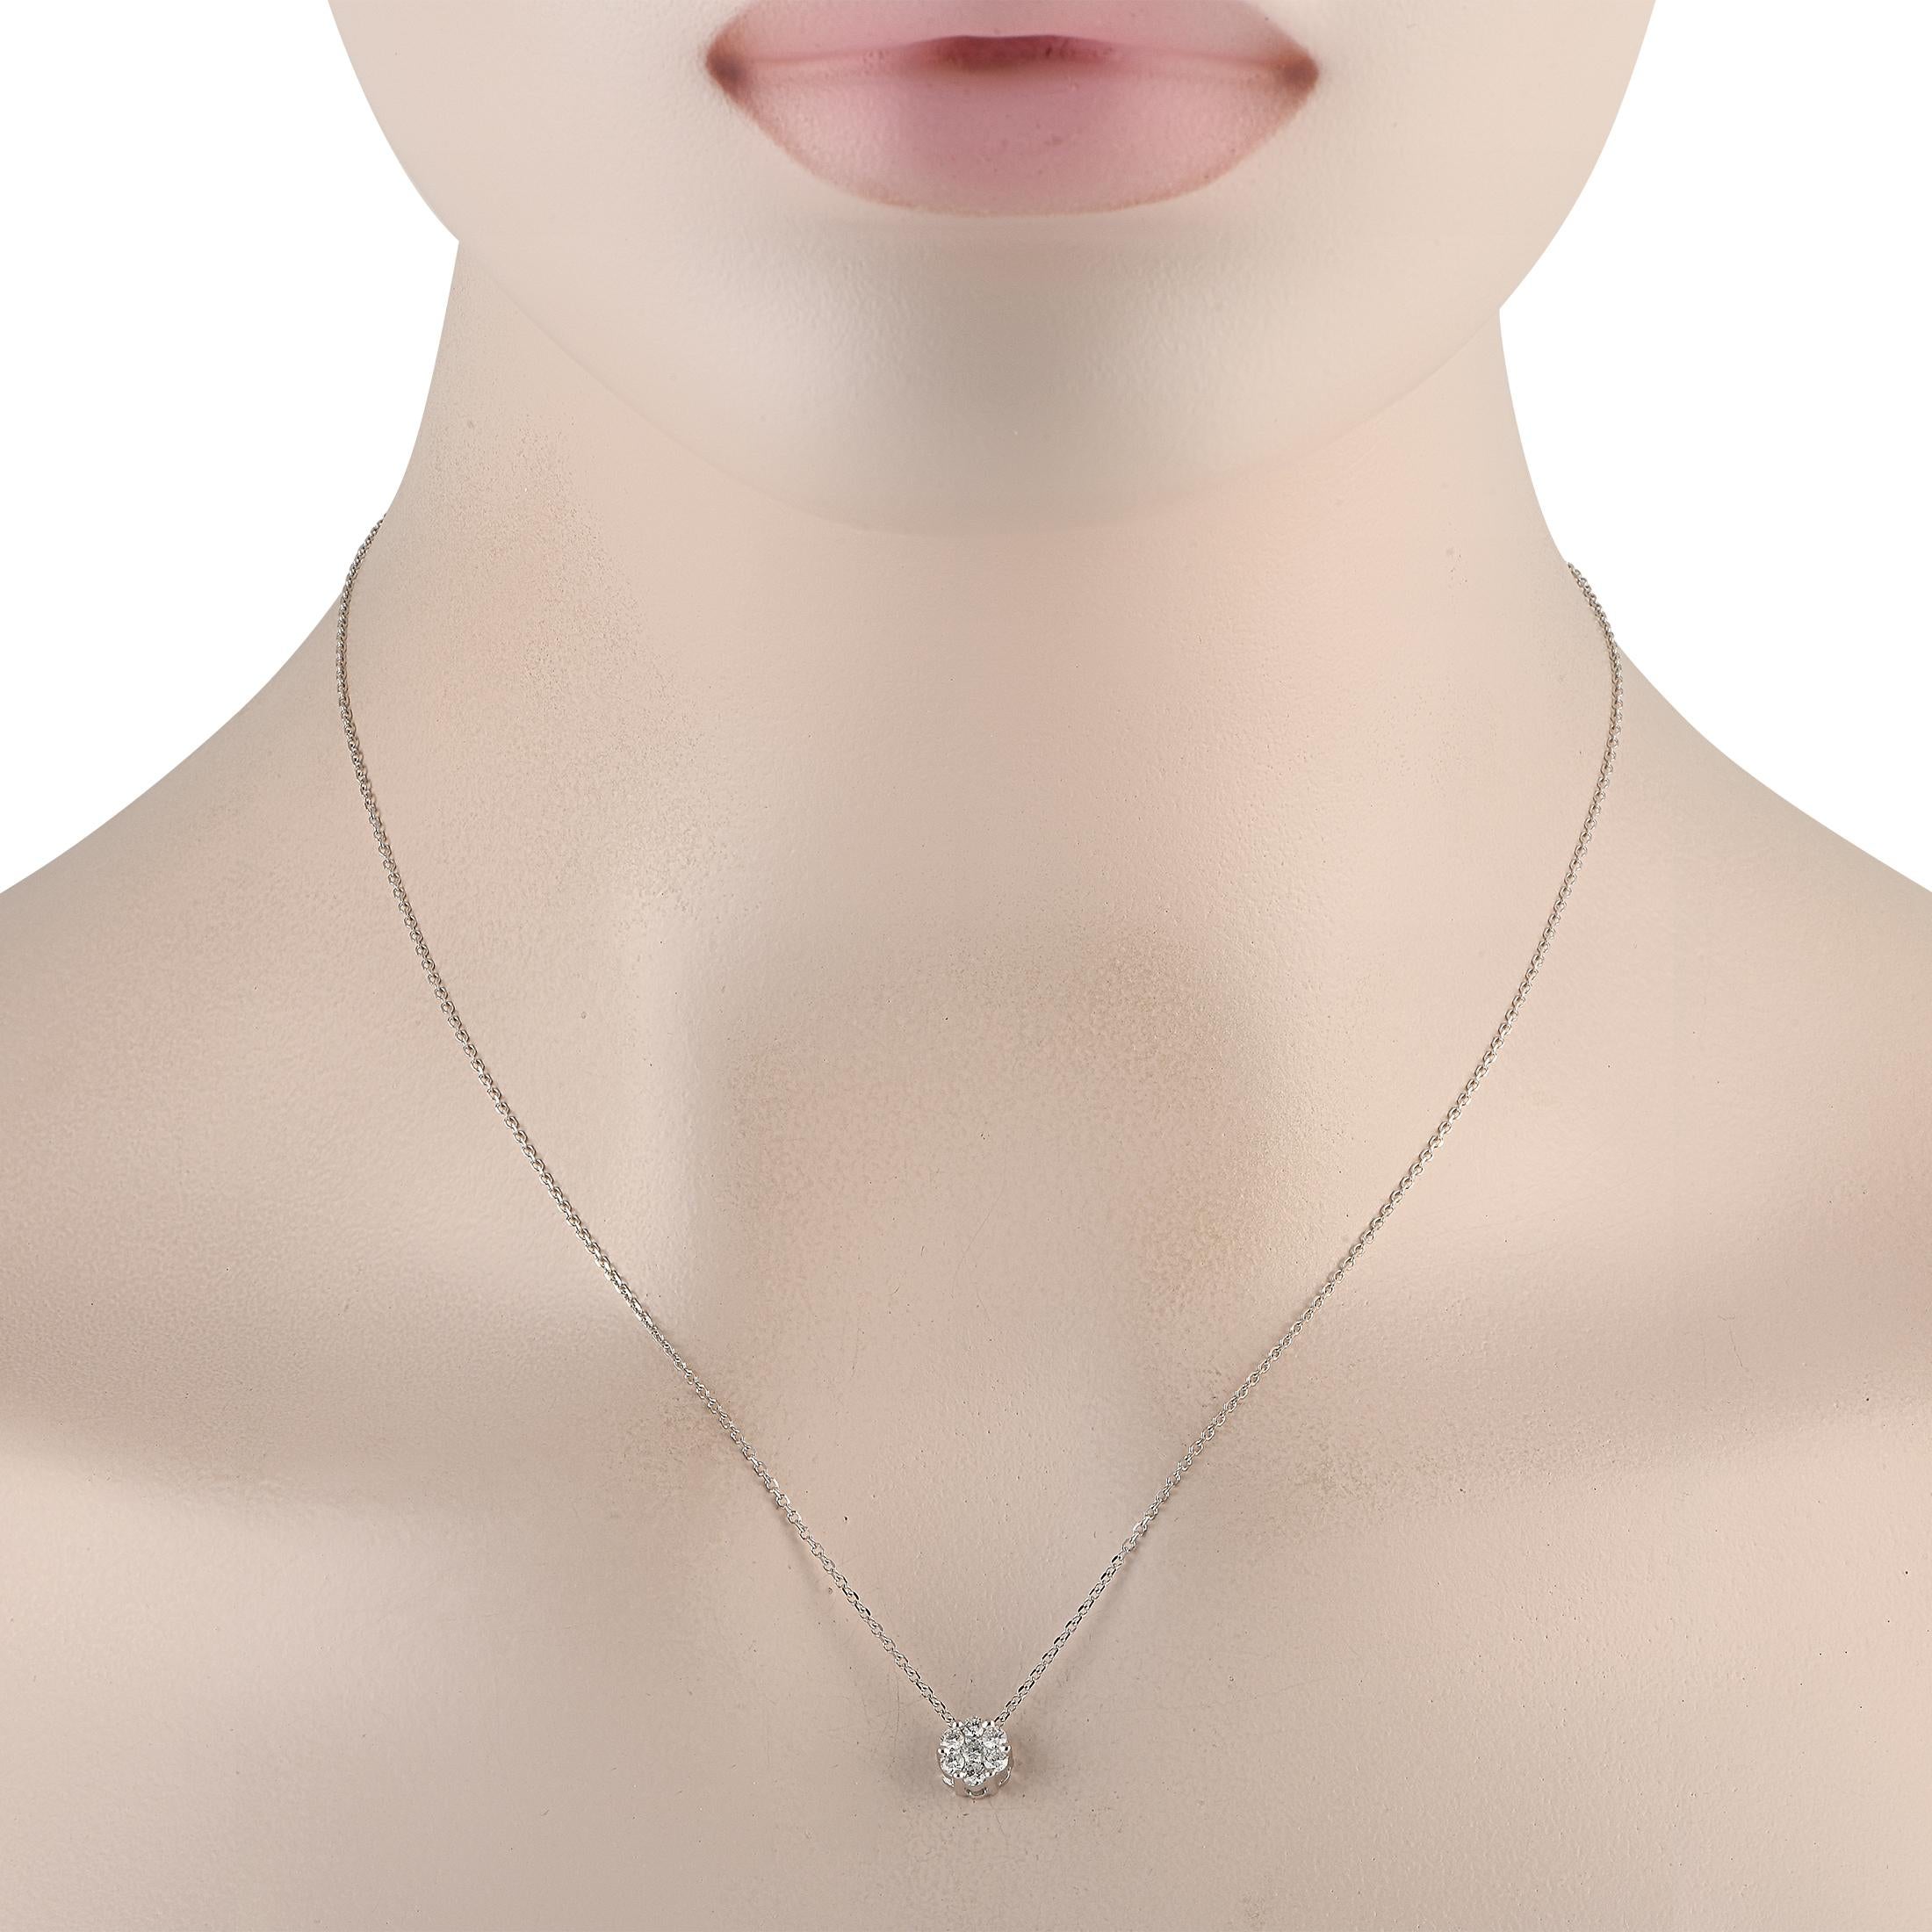 A cluster of Diamonds with a total weight of 0.40 carats add elegance to this necklaces simple, elegant 14K White Gold pendant. Crafted from 14K White Gold, the pendant measures 0.25 round and is suspended from a delicate 18 chain with secure